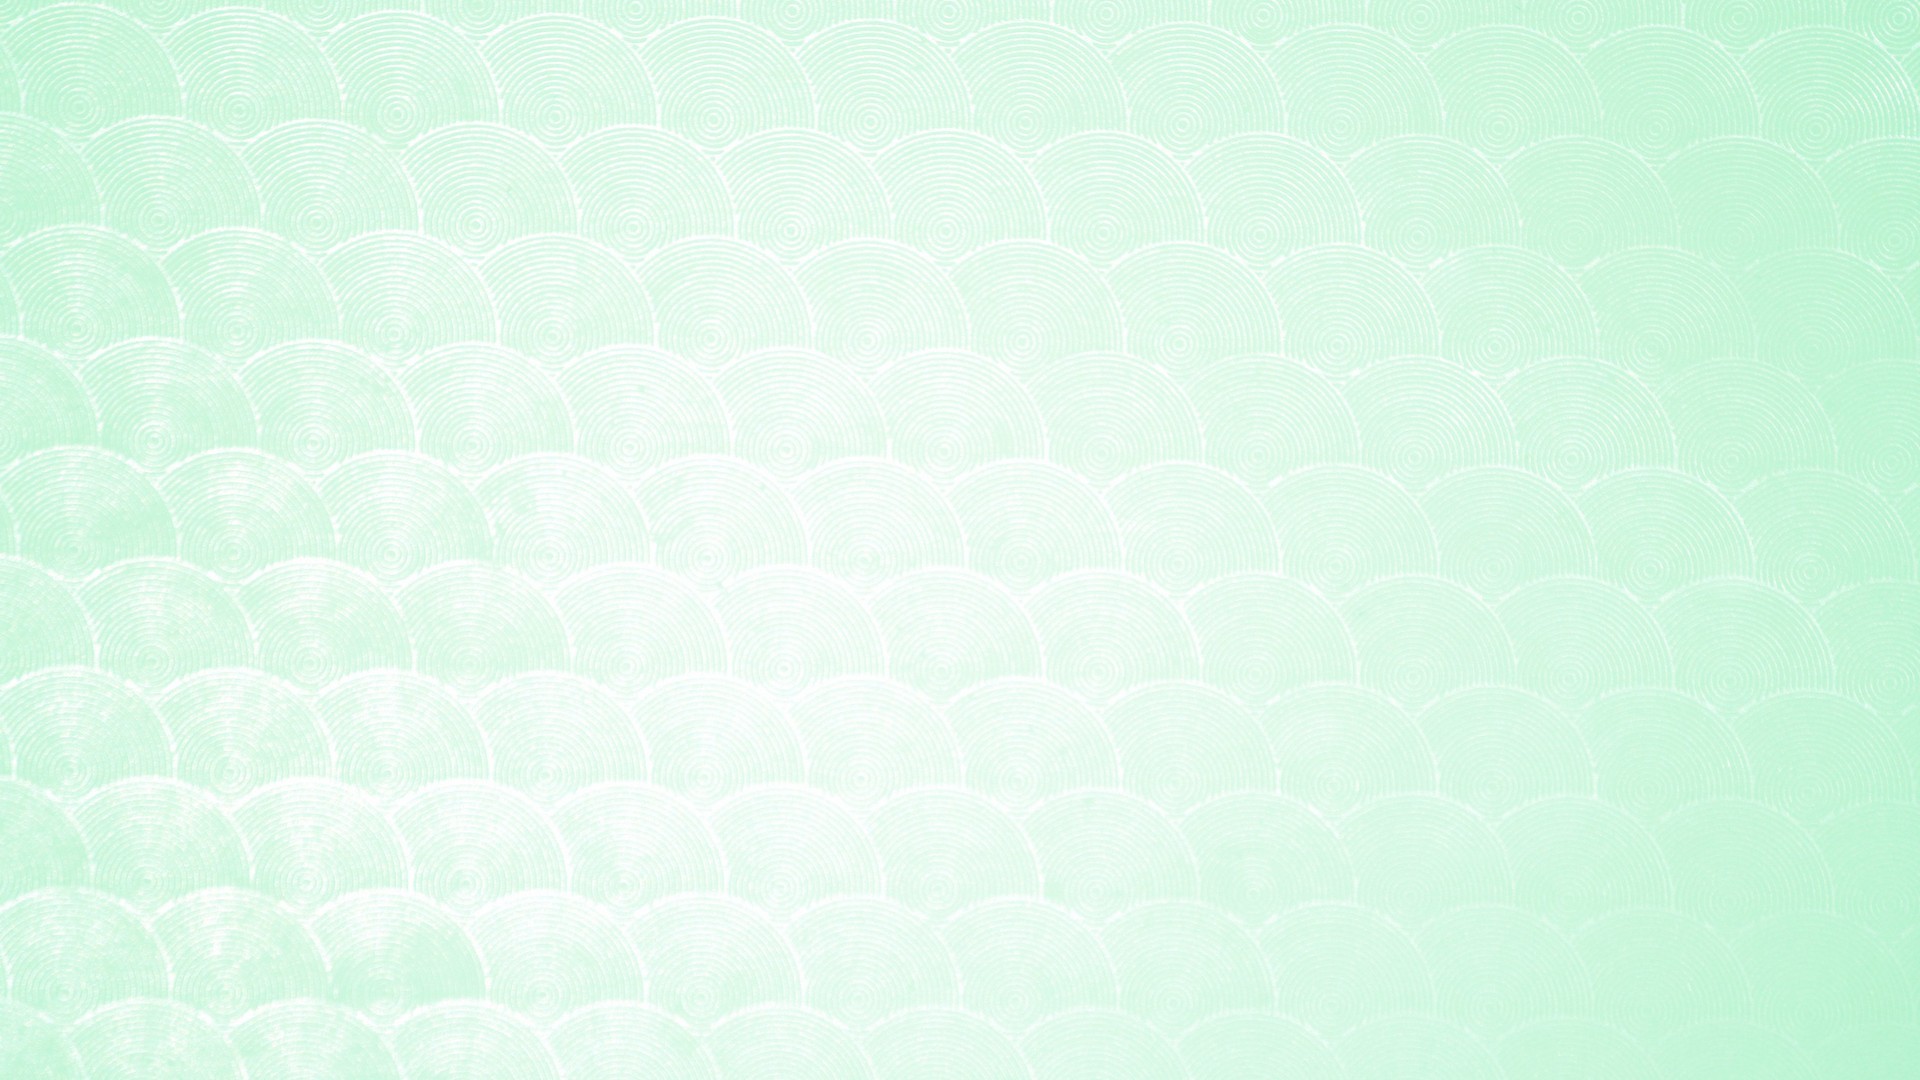 Desktop Wallpaper Mint Green with image resolution 1920x1080 pixel. You can use this wallpaper as background for your desktop Computer Screensavers, Android or iPhone smartphones